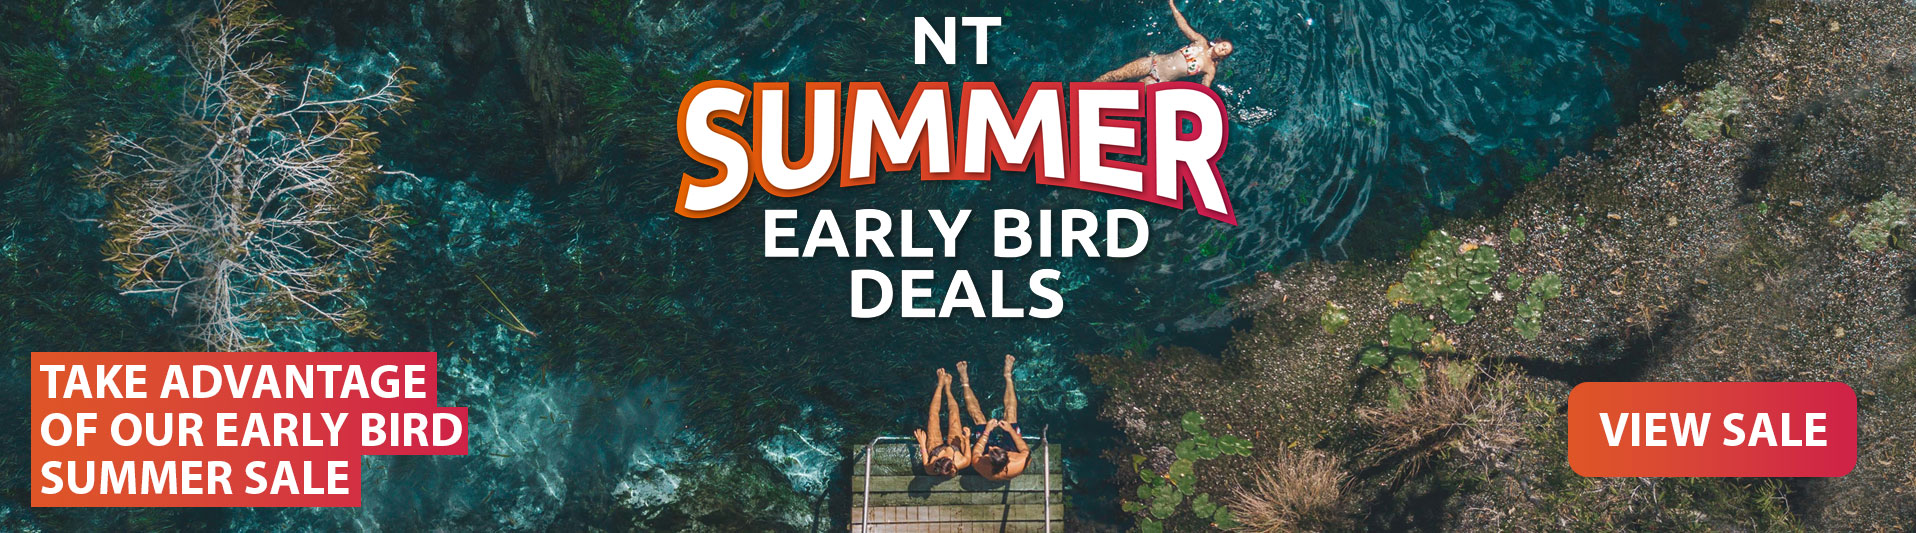 FOR NT DEALS, IT'S NT NOW - Get your cracking good deal today.